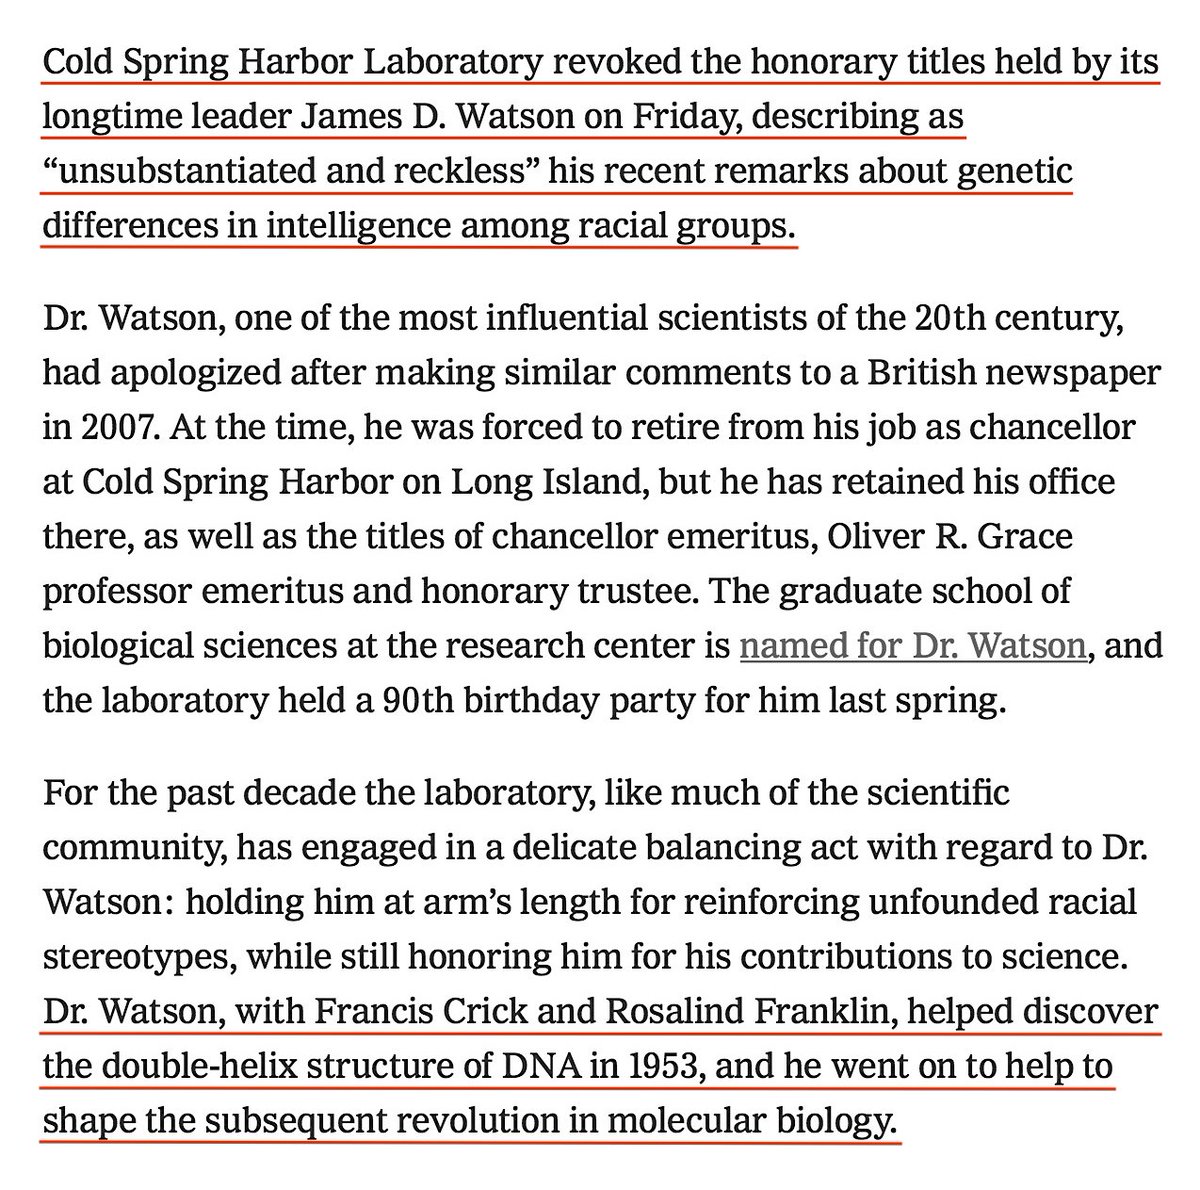 Cold Spring Harbor Laboratory Revoked Honorary Titles And Severed Ties With James D. Watson For His Comments Suggesting Black People Are Intrinsically Less Intelligent Than Whites.Cold Spring Harbor Felt Exposed, And Retaliated. https://www.nytimes.com/2019/01/11/science/watson-dna-genetics.html #QAnon  #Genetics  @potus